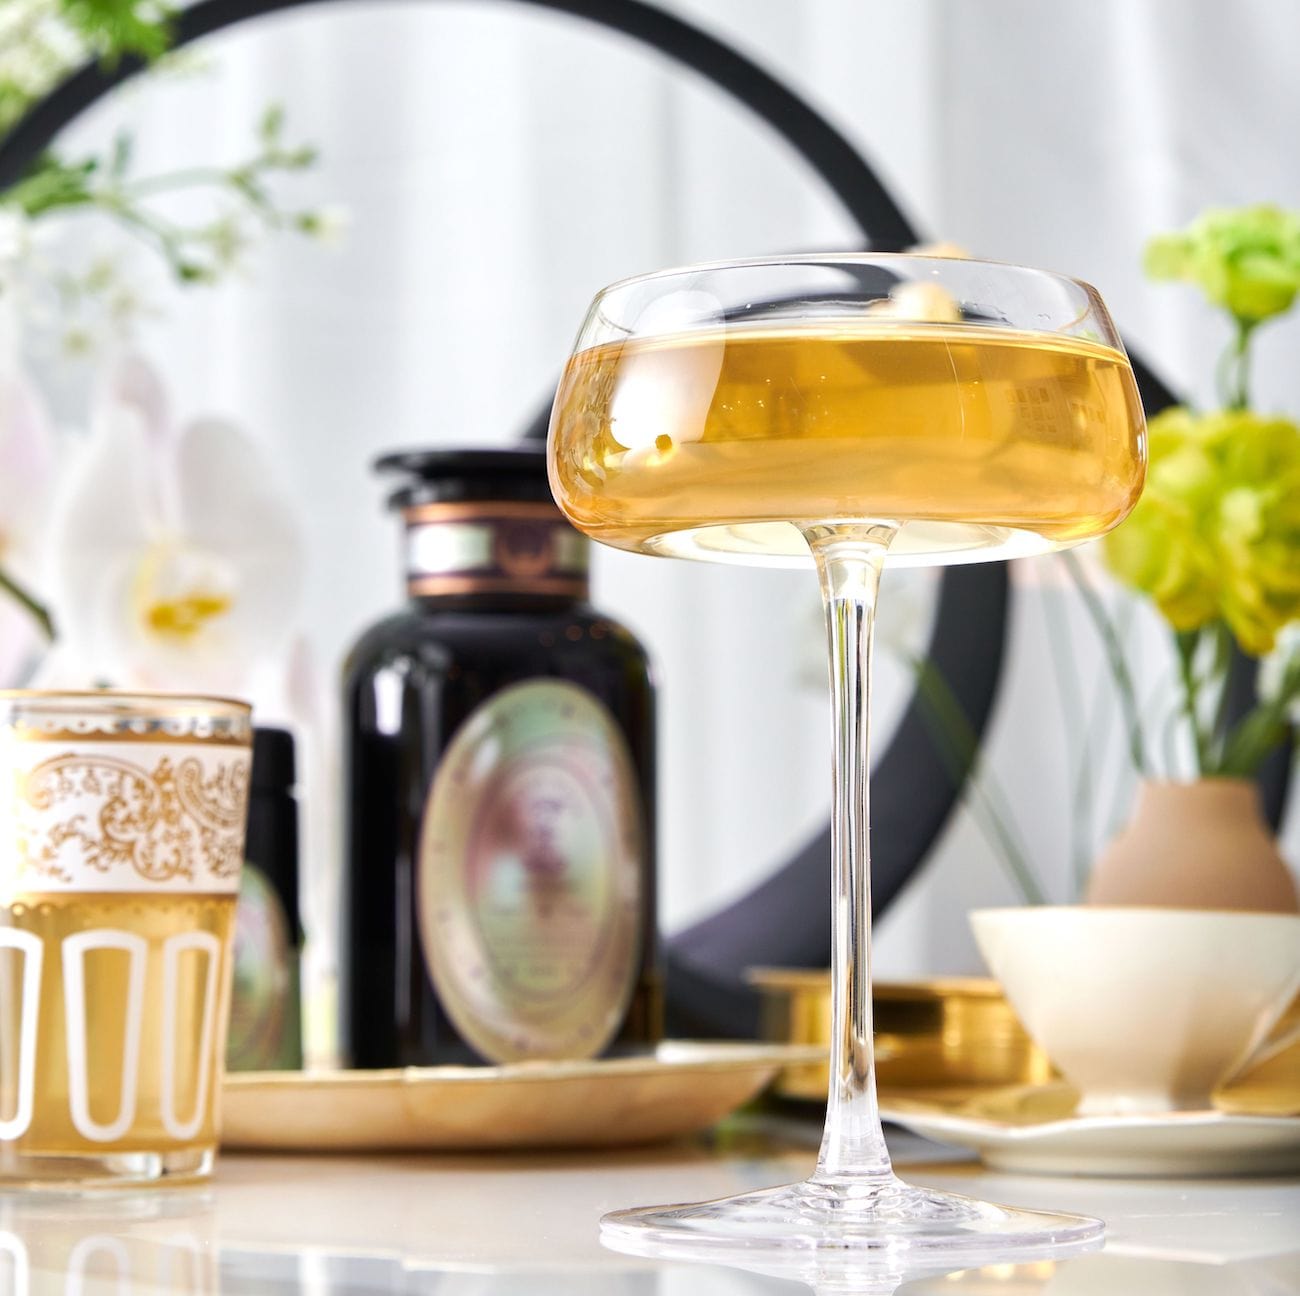 A clear, elegant coupe glass filled with a golden beverage sits in the foreground on a white table with an ornate white and gold glass to its left. The background features a blurred black circular frame, white flowers, and a decorative black apothecary jar hinting at the charm of Magic Hour's Pearl Tea of Beauty, Clarity, and a Sense of Peace.